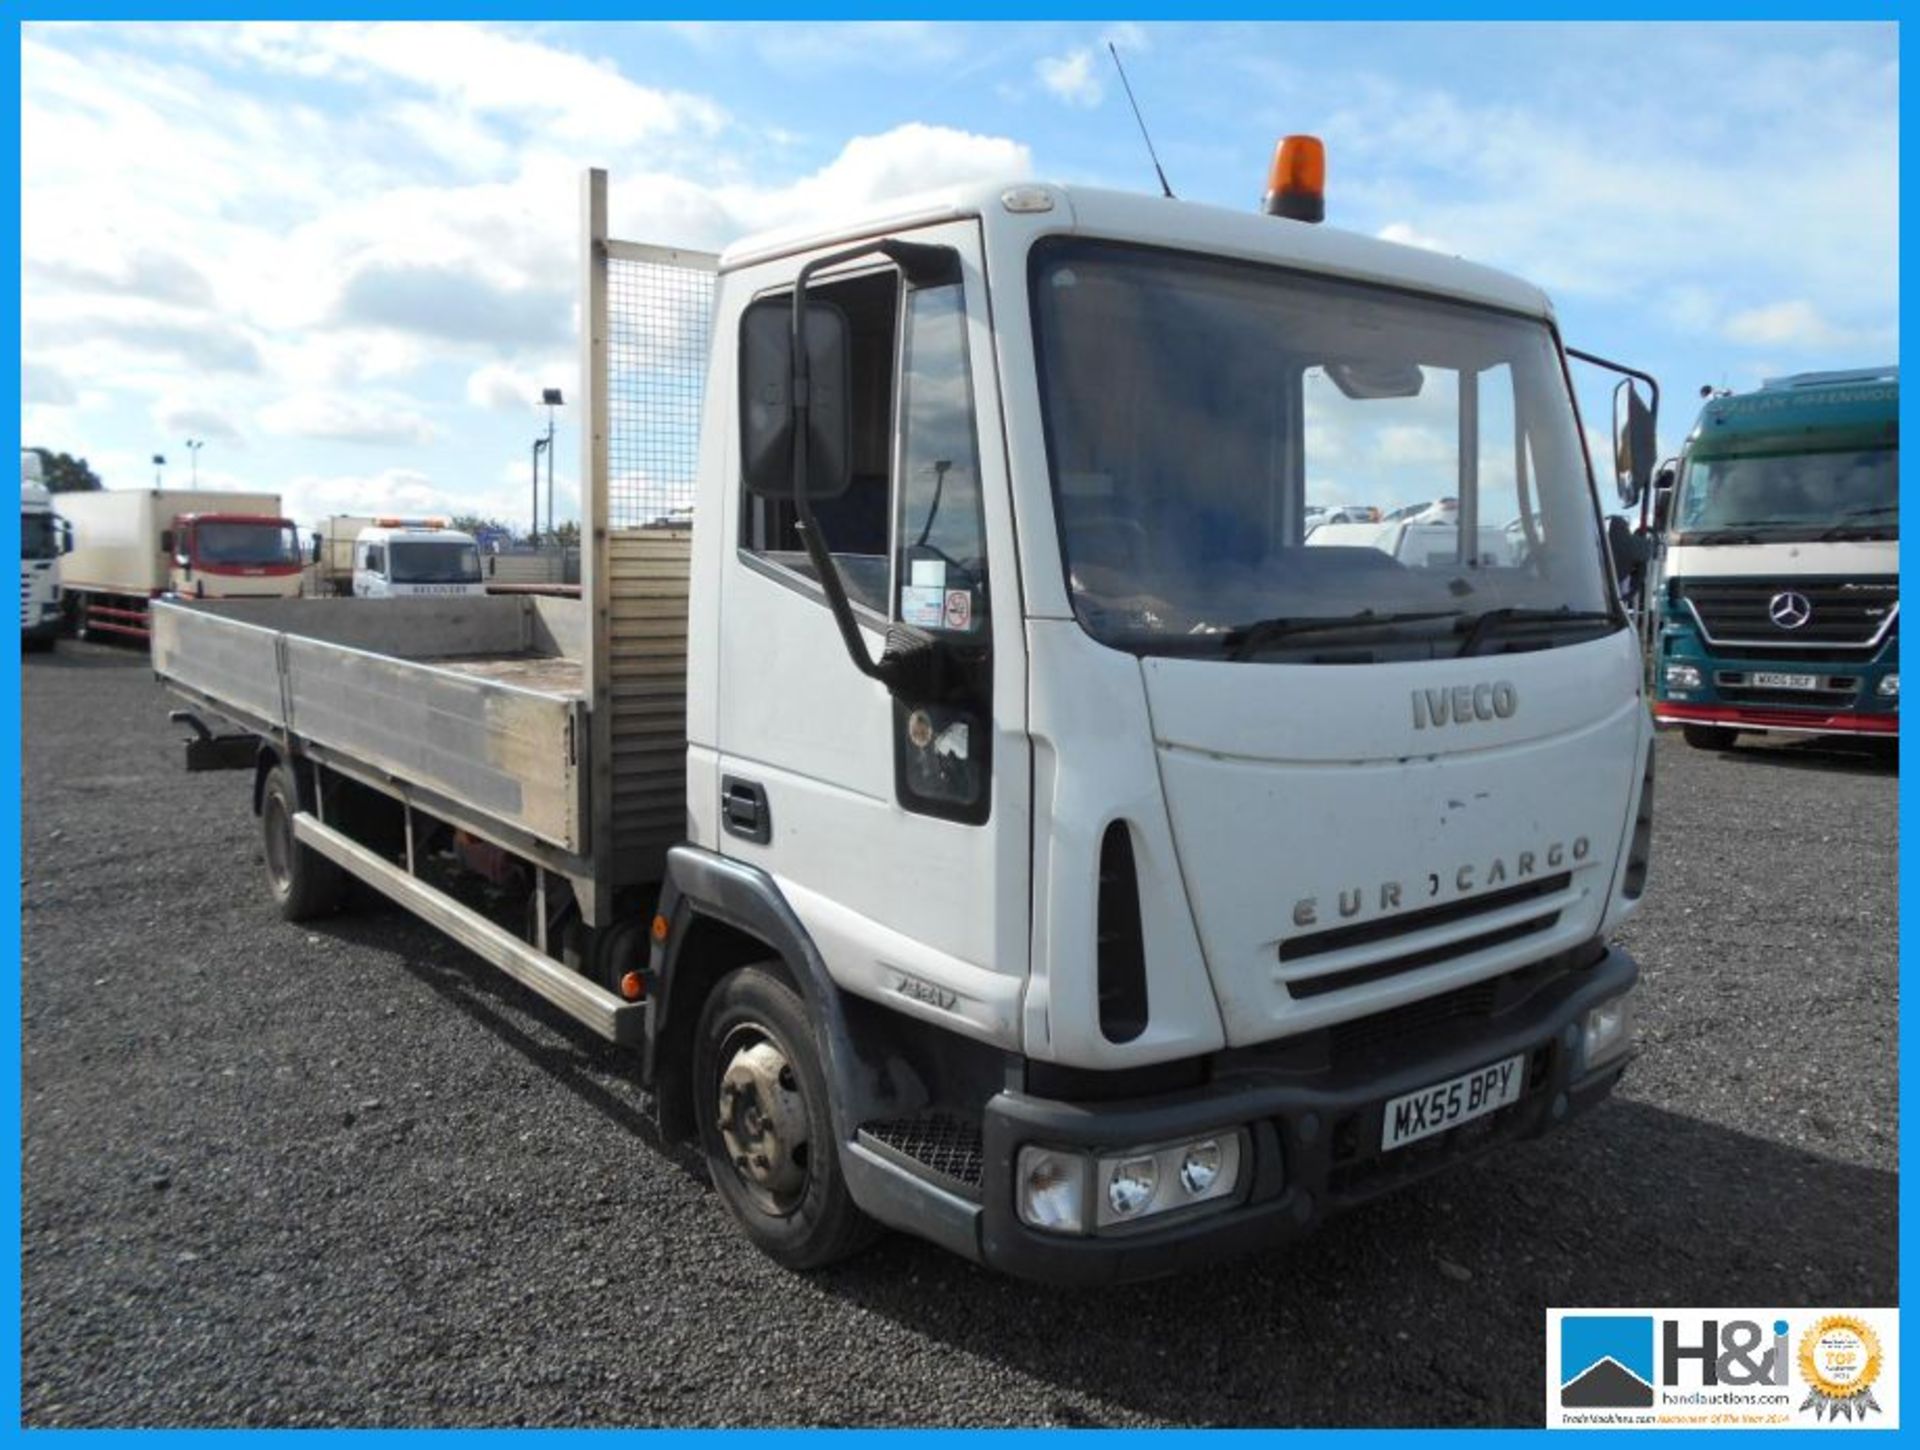 2005 '55' REG. IVECO FORD EURO CARGO 75E17. 20ft ALLOY DROPSIDE BODY. 566,500km. 2 OWNERS. MANUAL